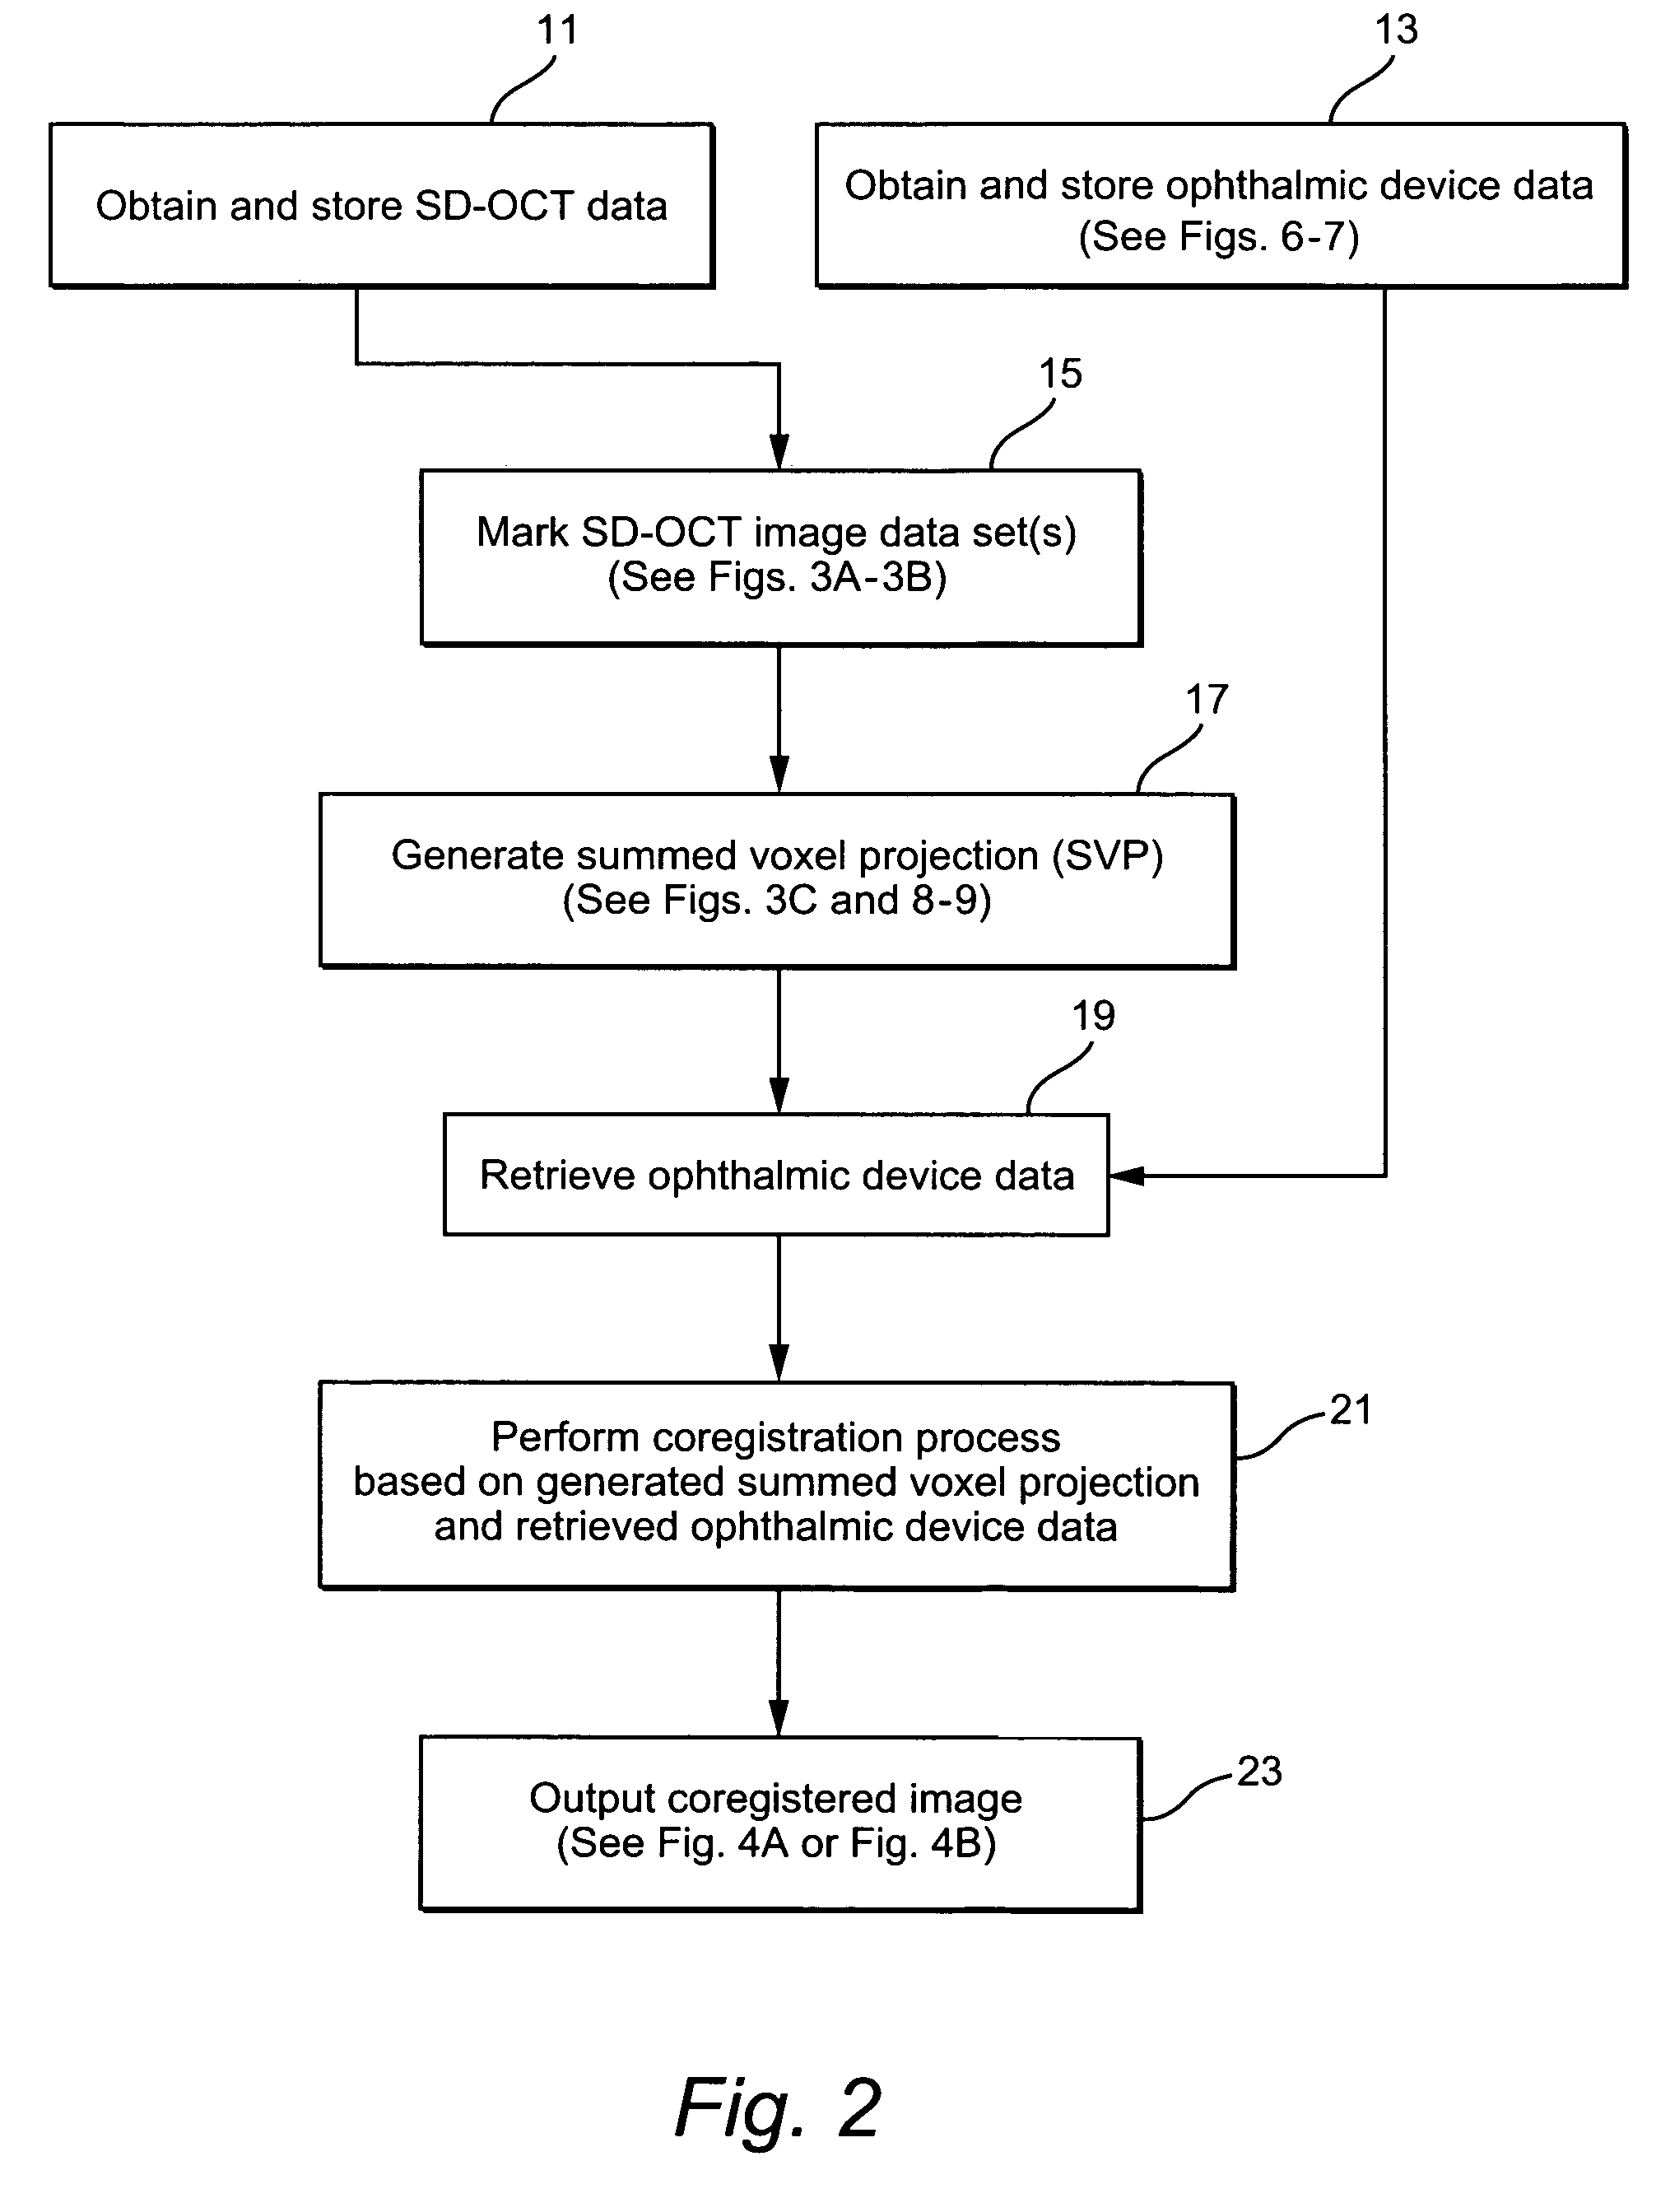 Method and system of coregistrating optical coherence tomography (OCT) with other clinical tests